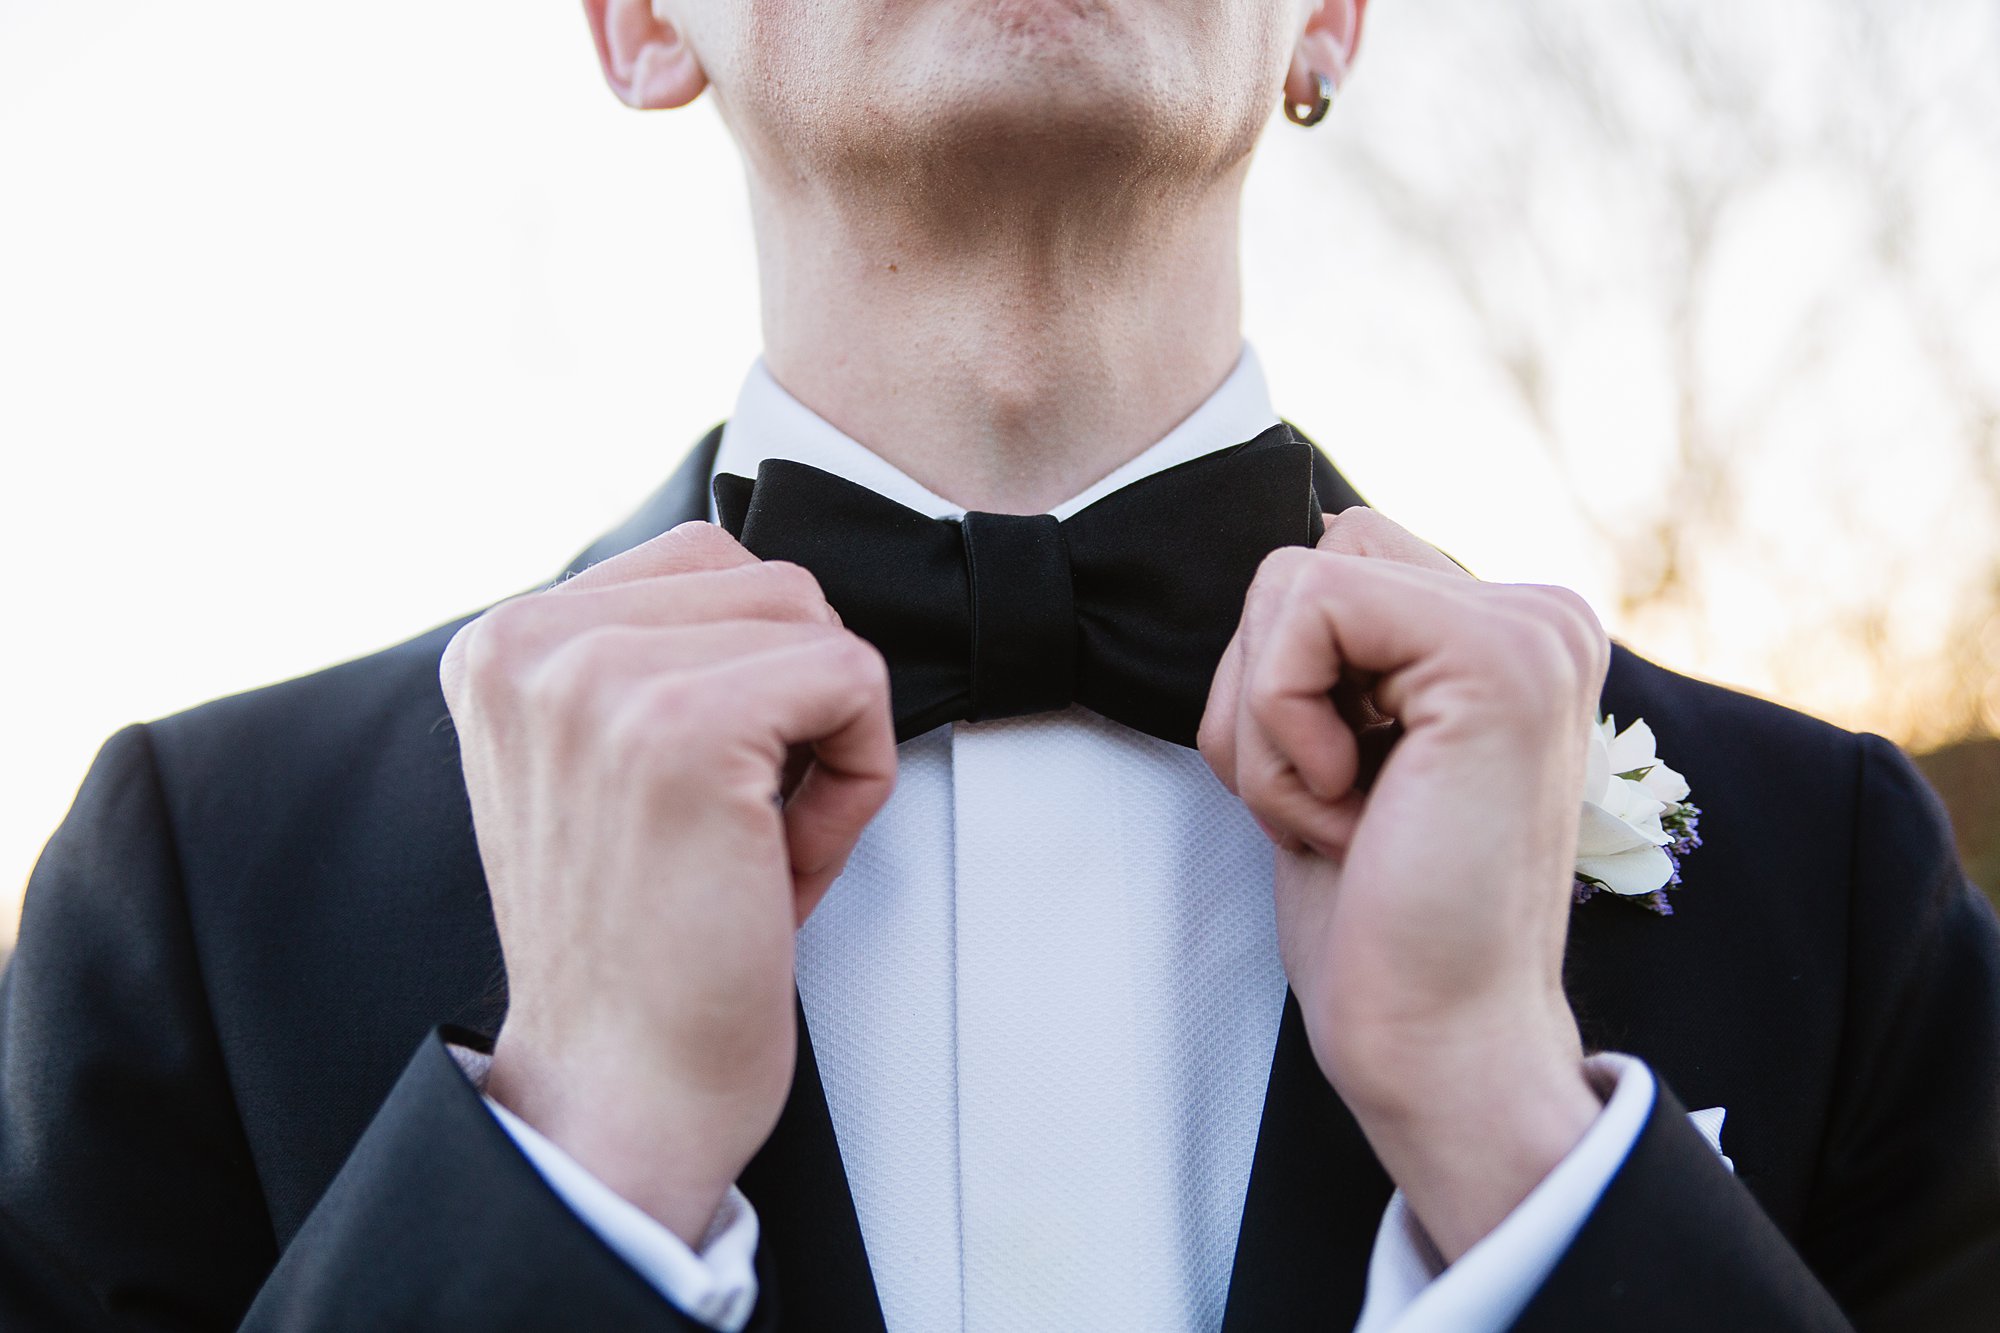 Groom adjusting his bow tie on his wedding day by photographer PMA Photography.